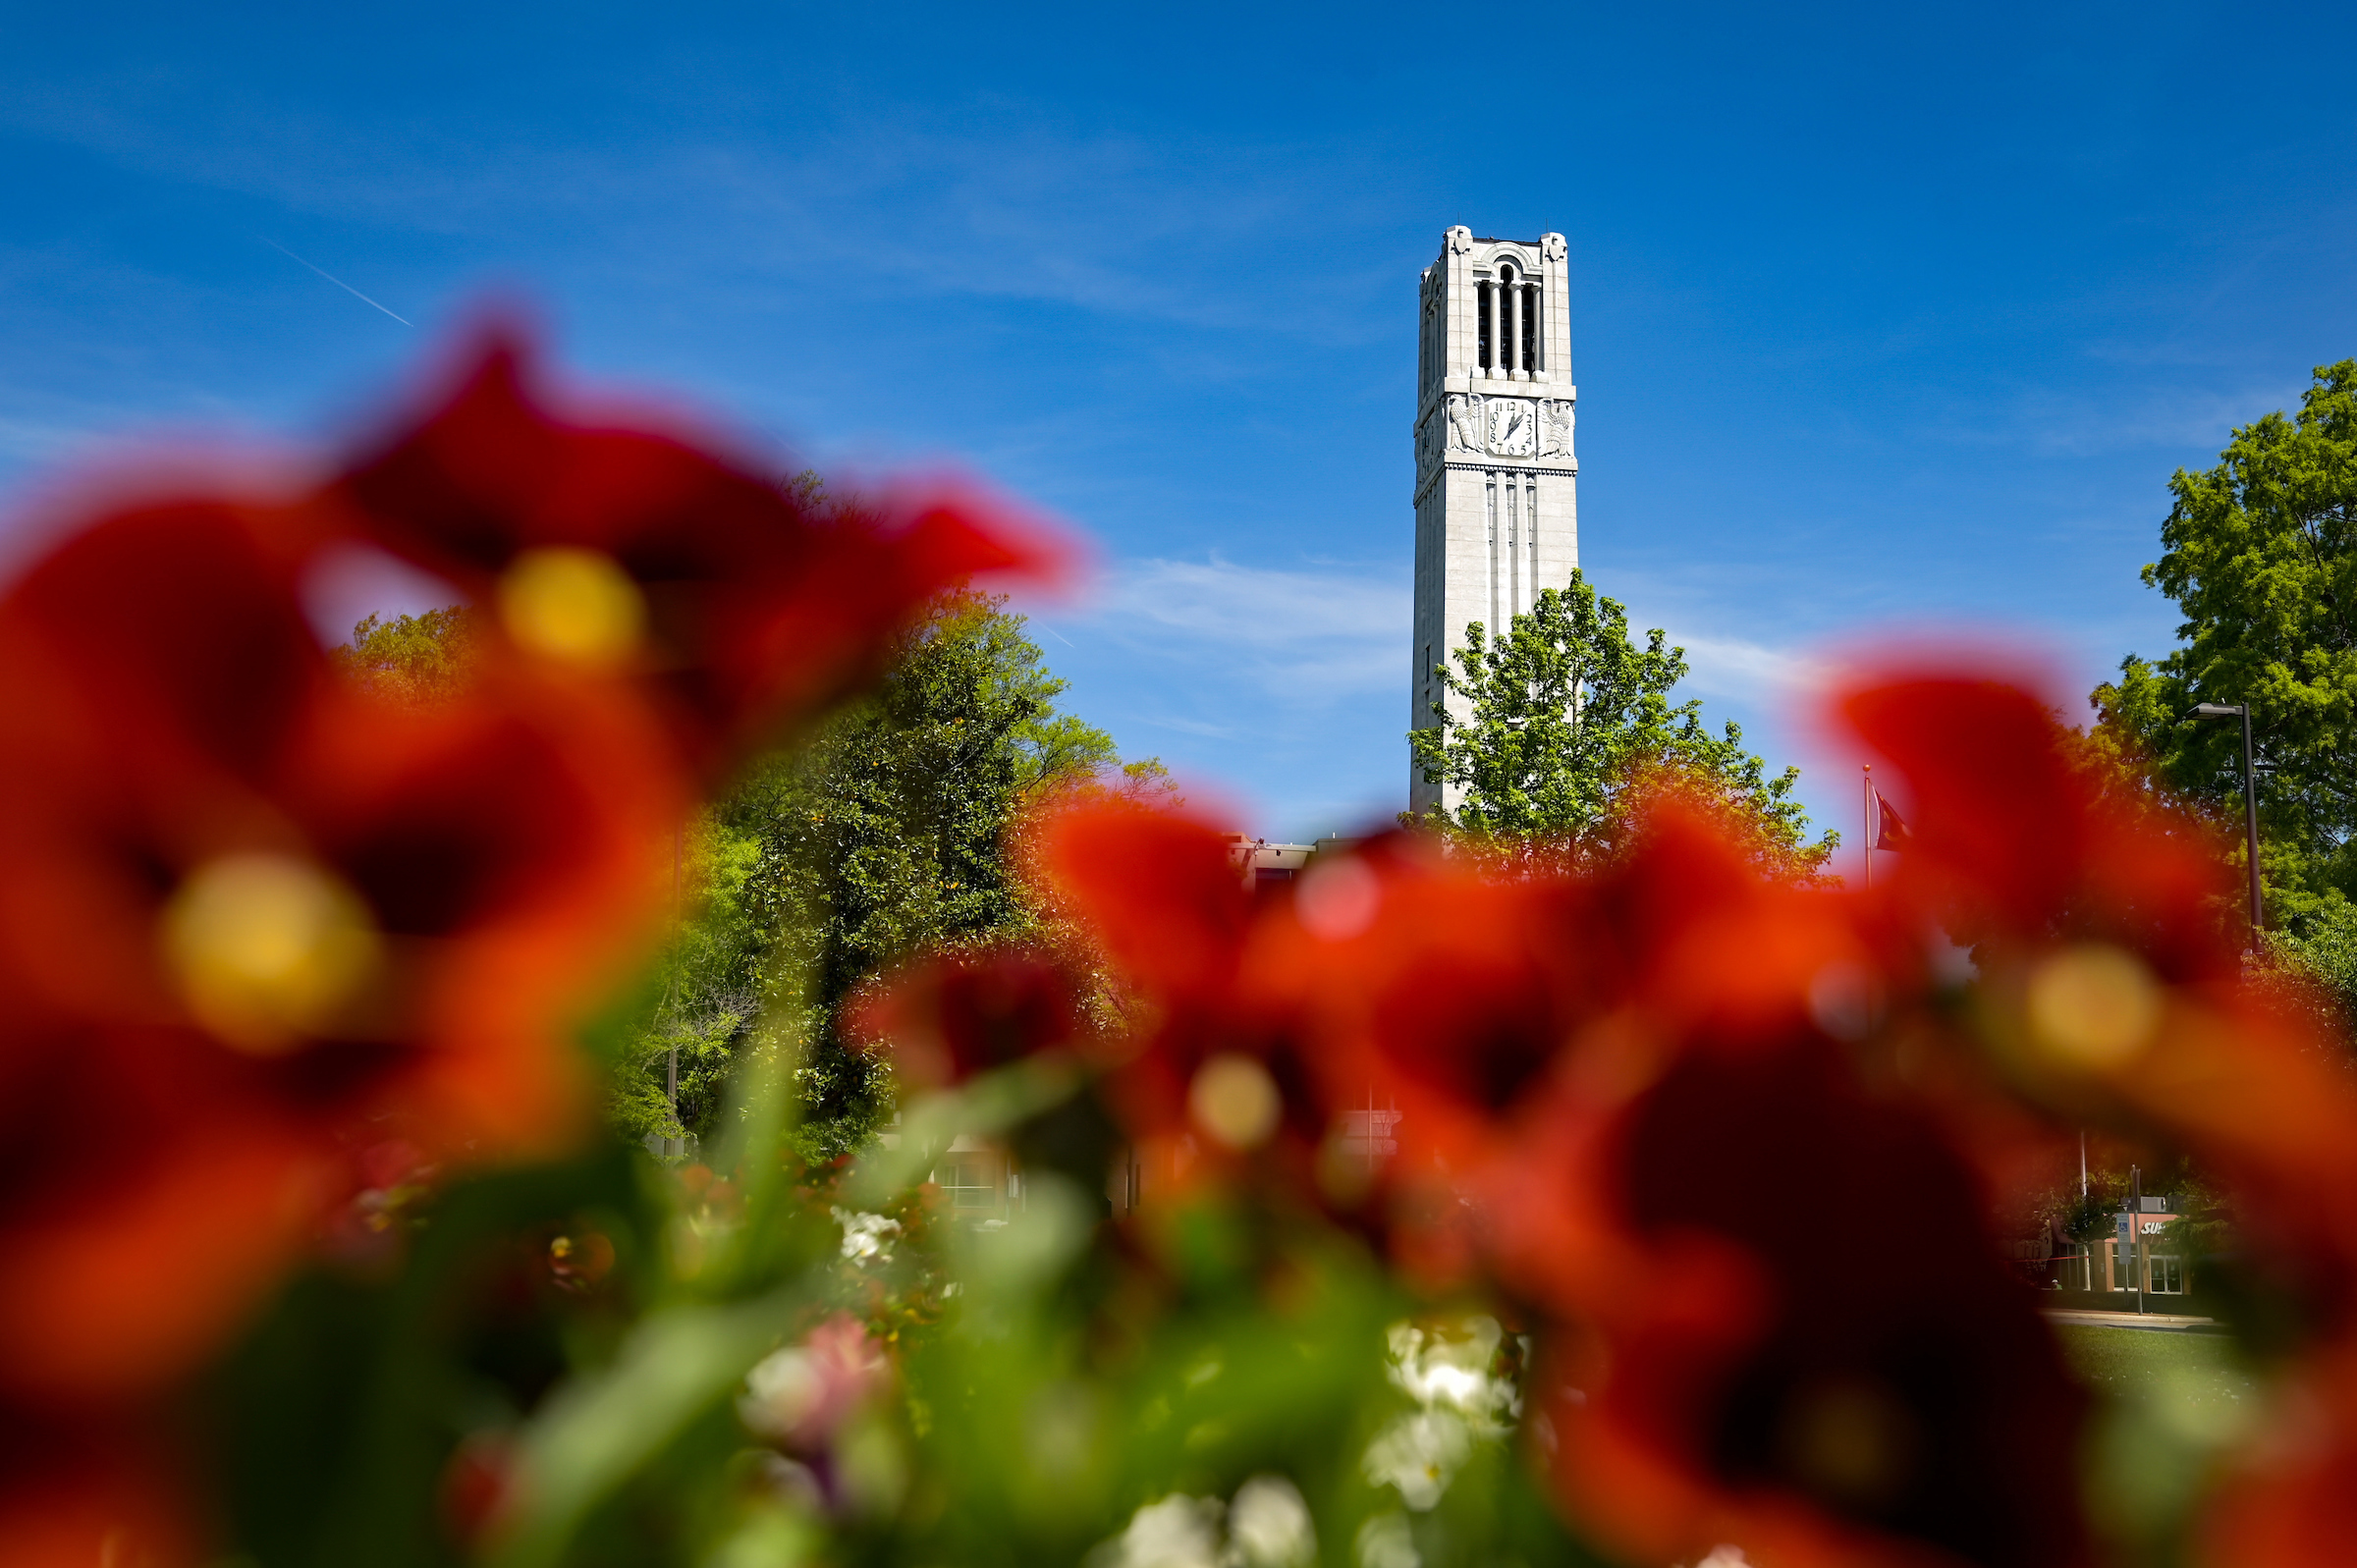 Spring blooms around the Memorial Belltower on an April afternoon.